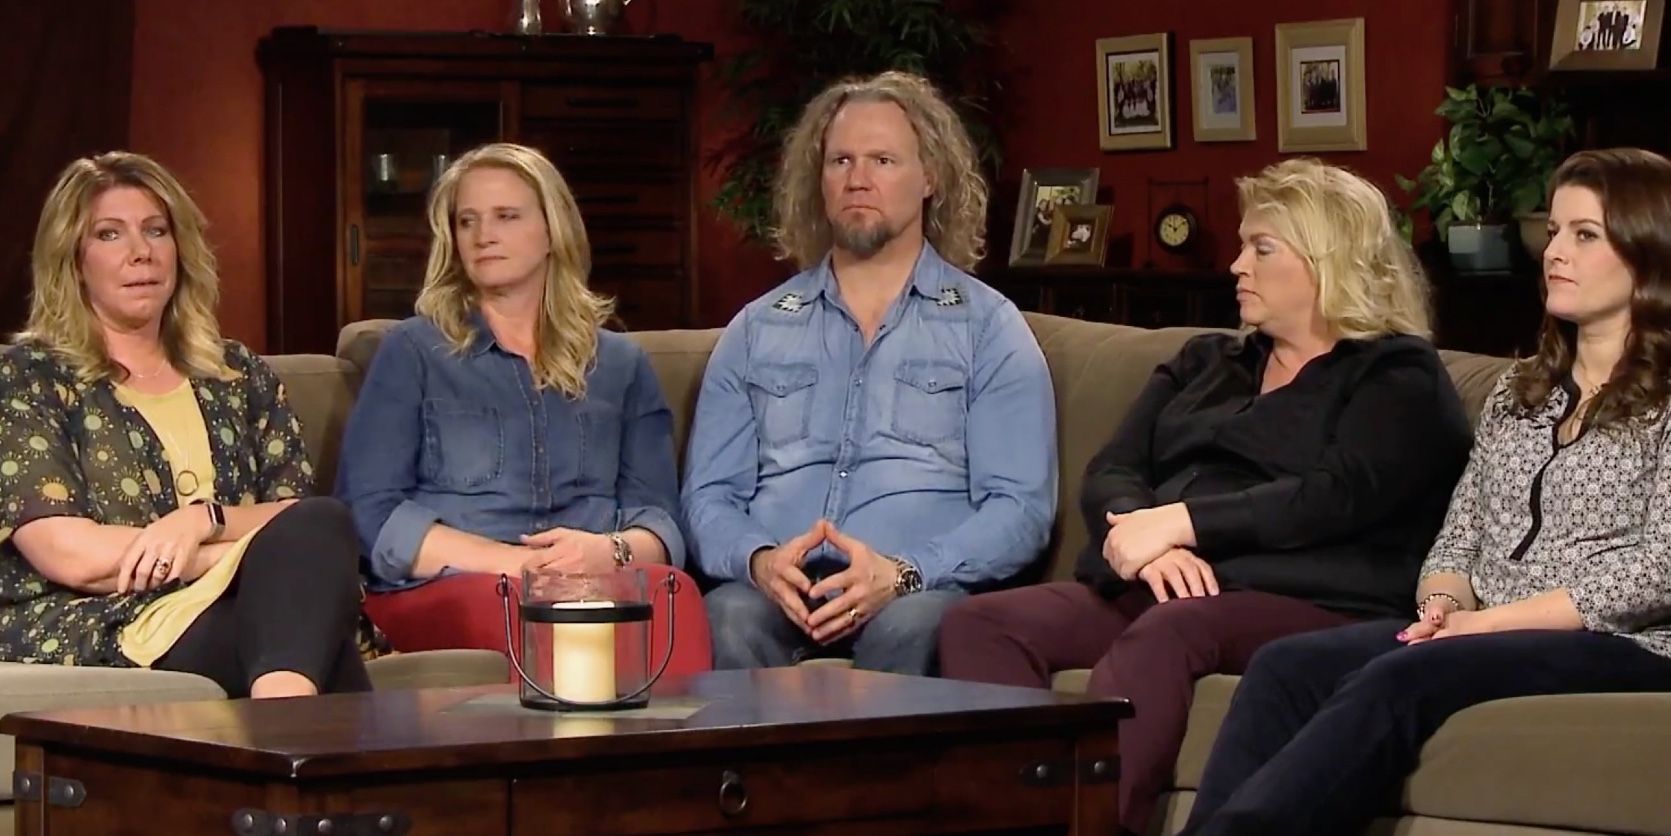 Sister Wives' Kody, Meri, Christine, Jenelle and Robyn Brown on couch